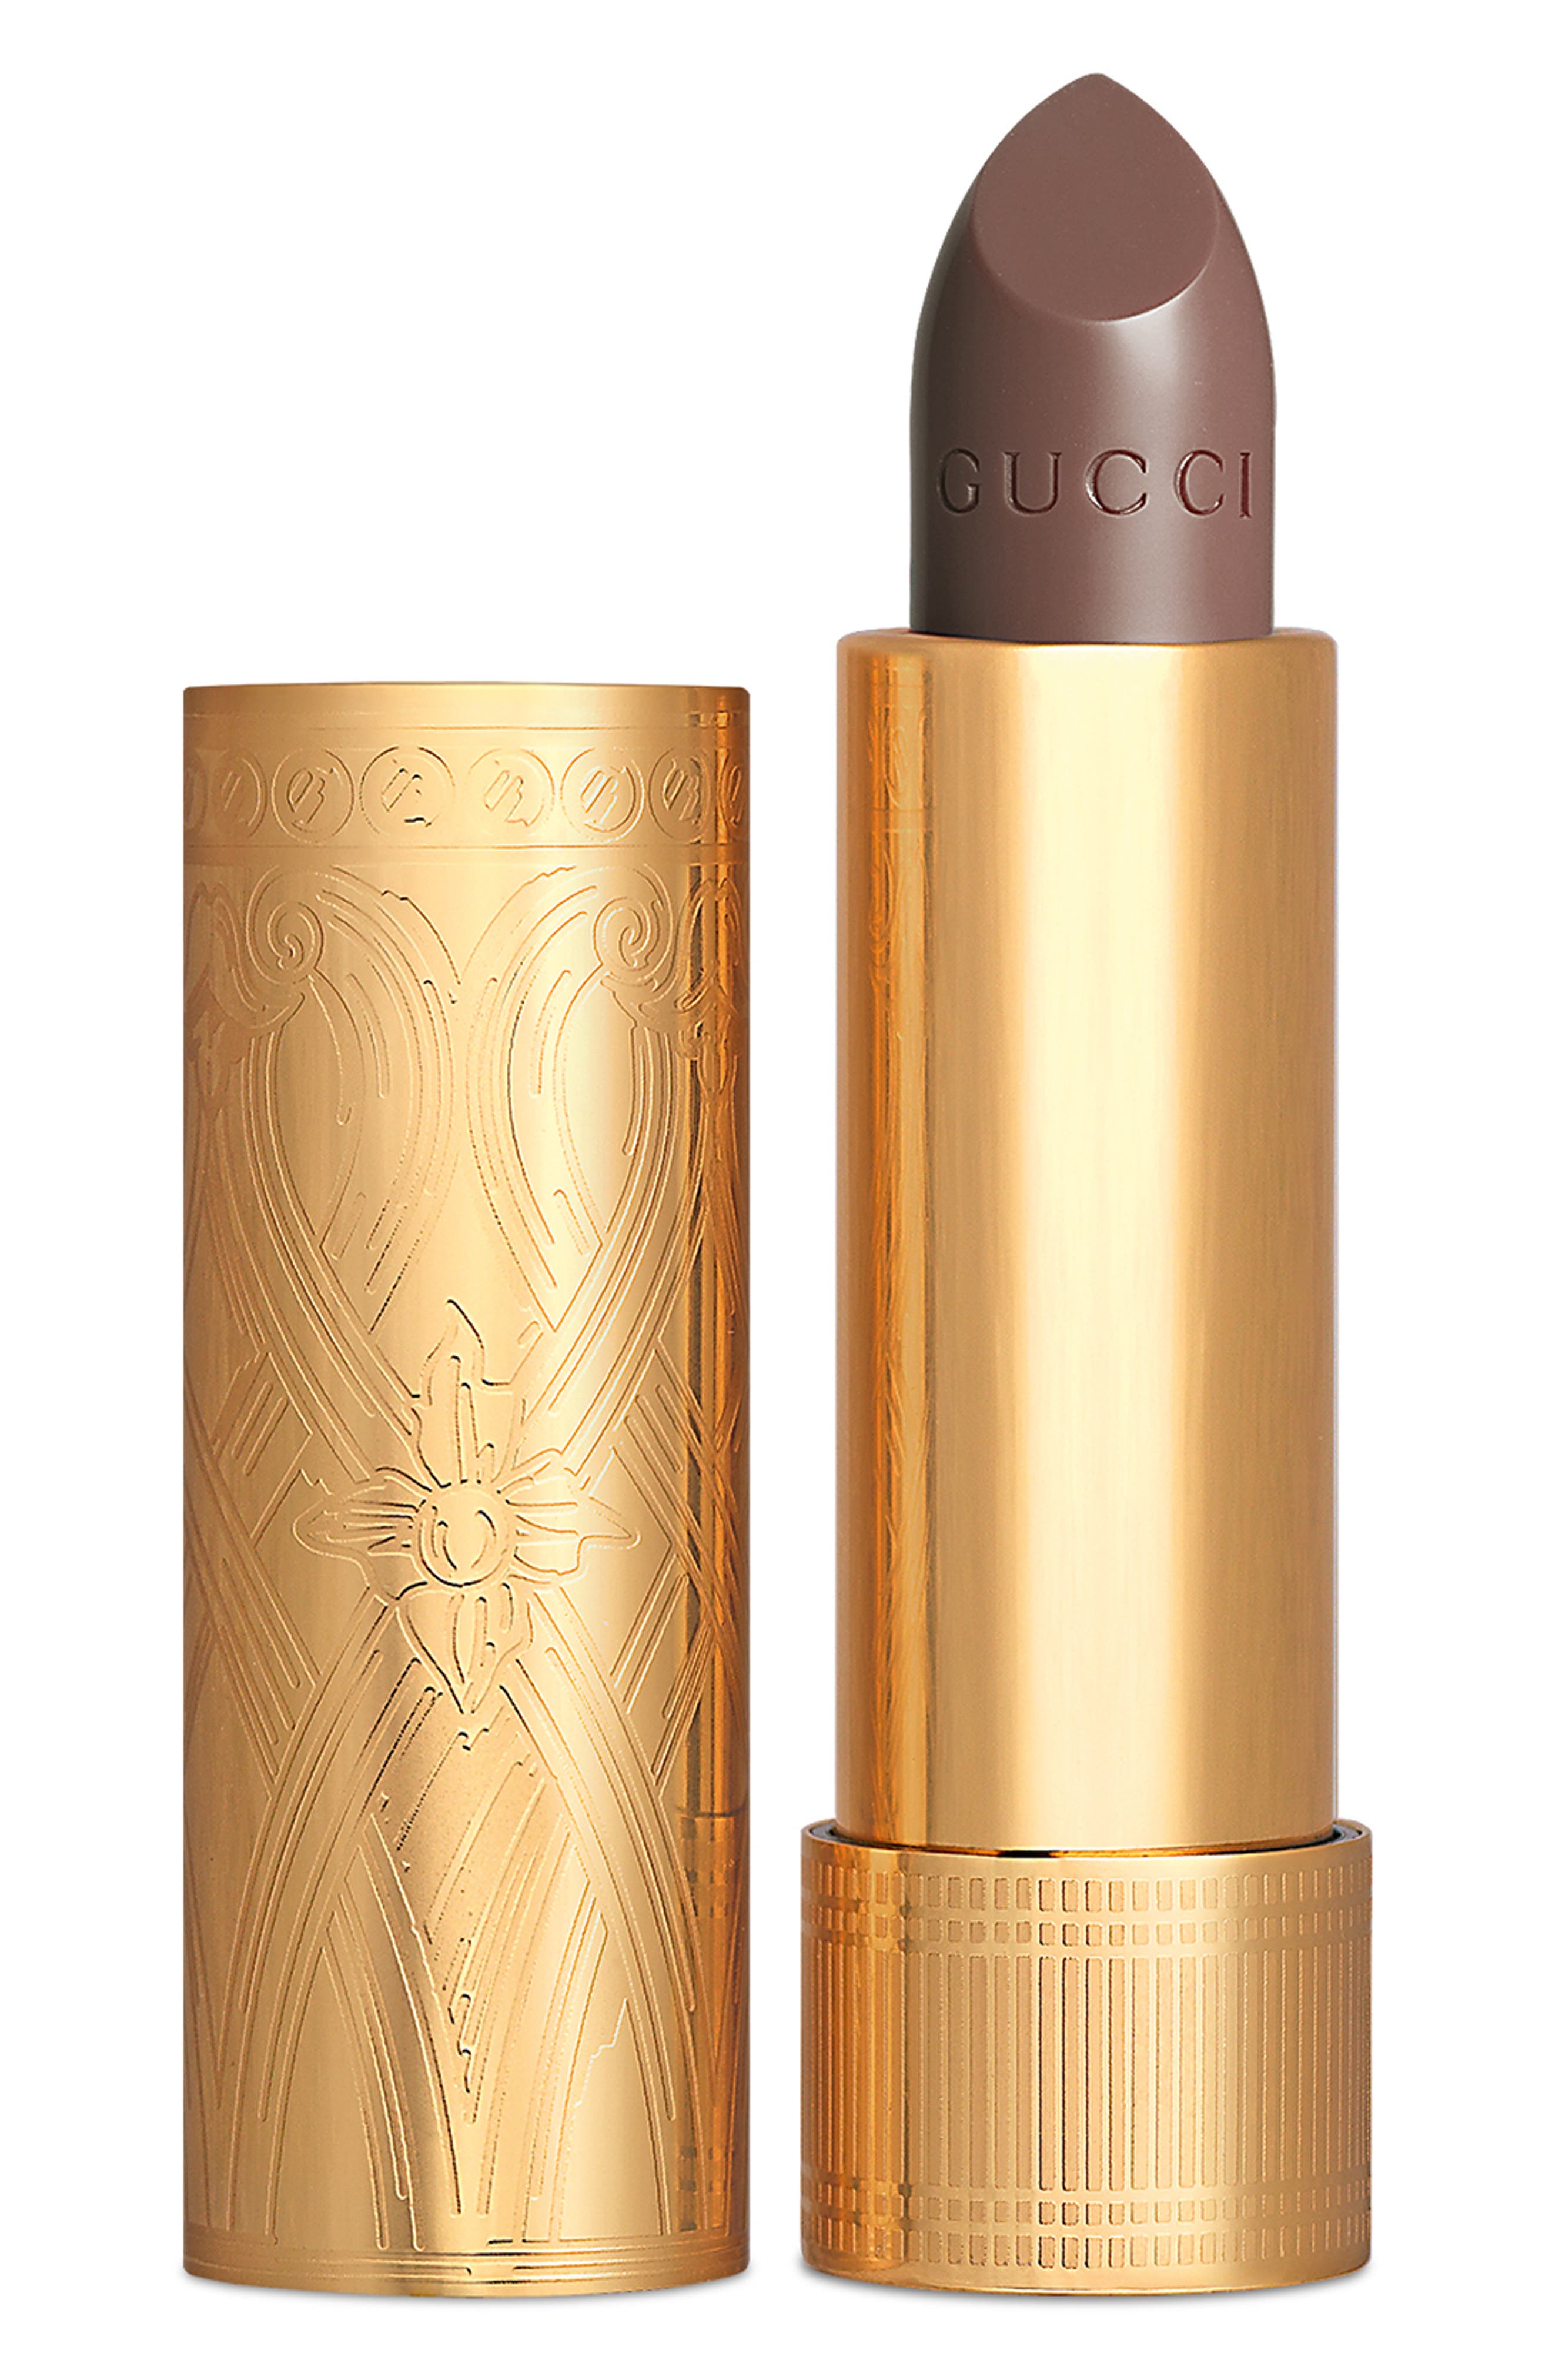 Gucci Rouge a Levres Satin Lipstick in Pauline Brown at Nordstrom